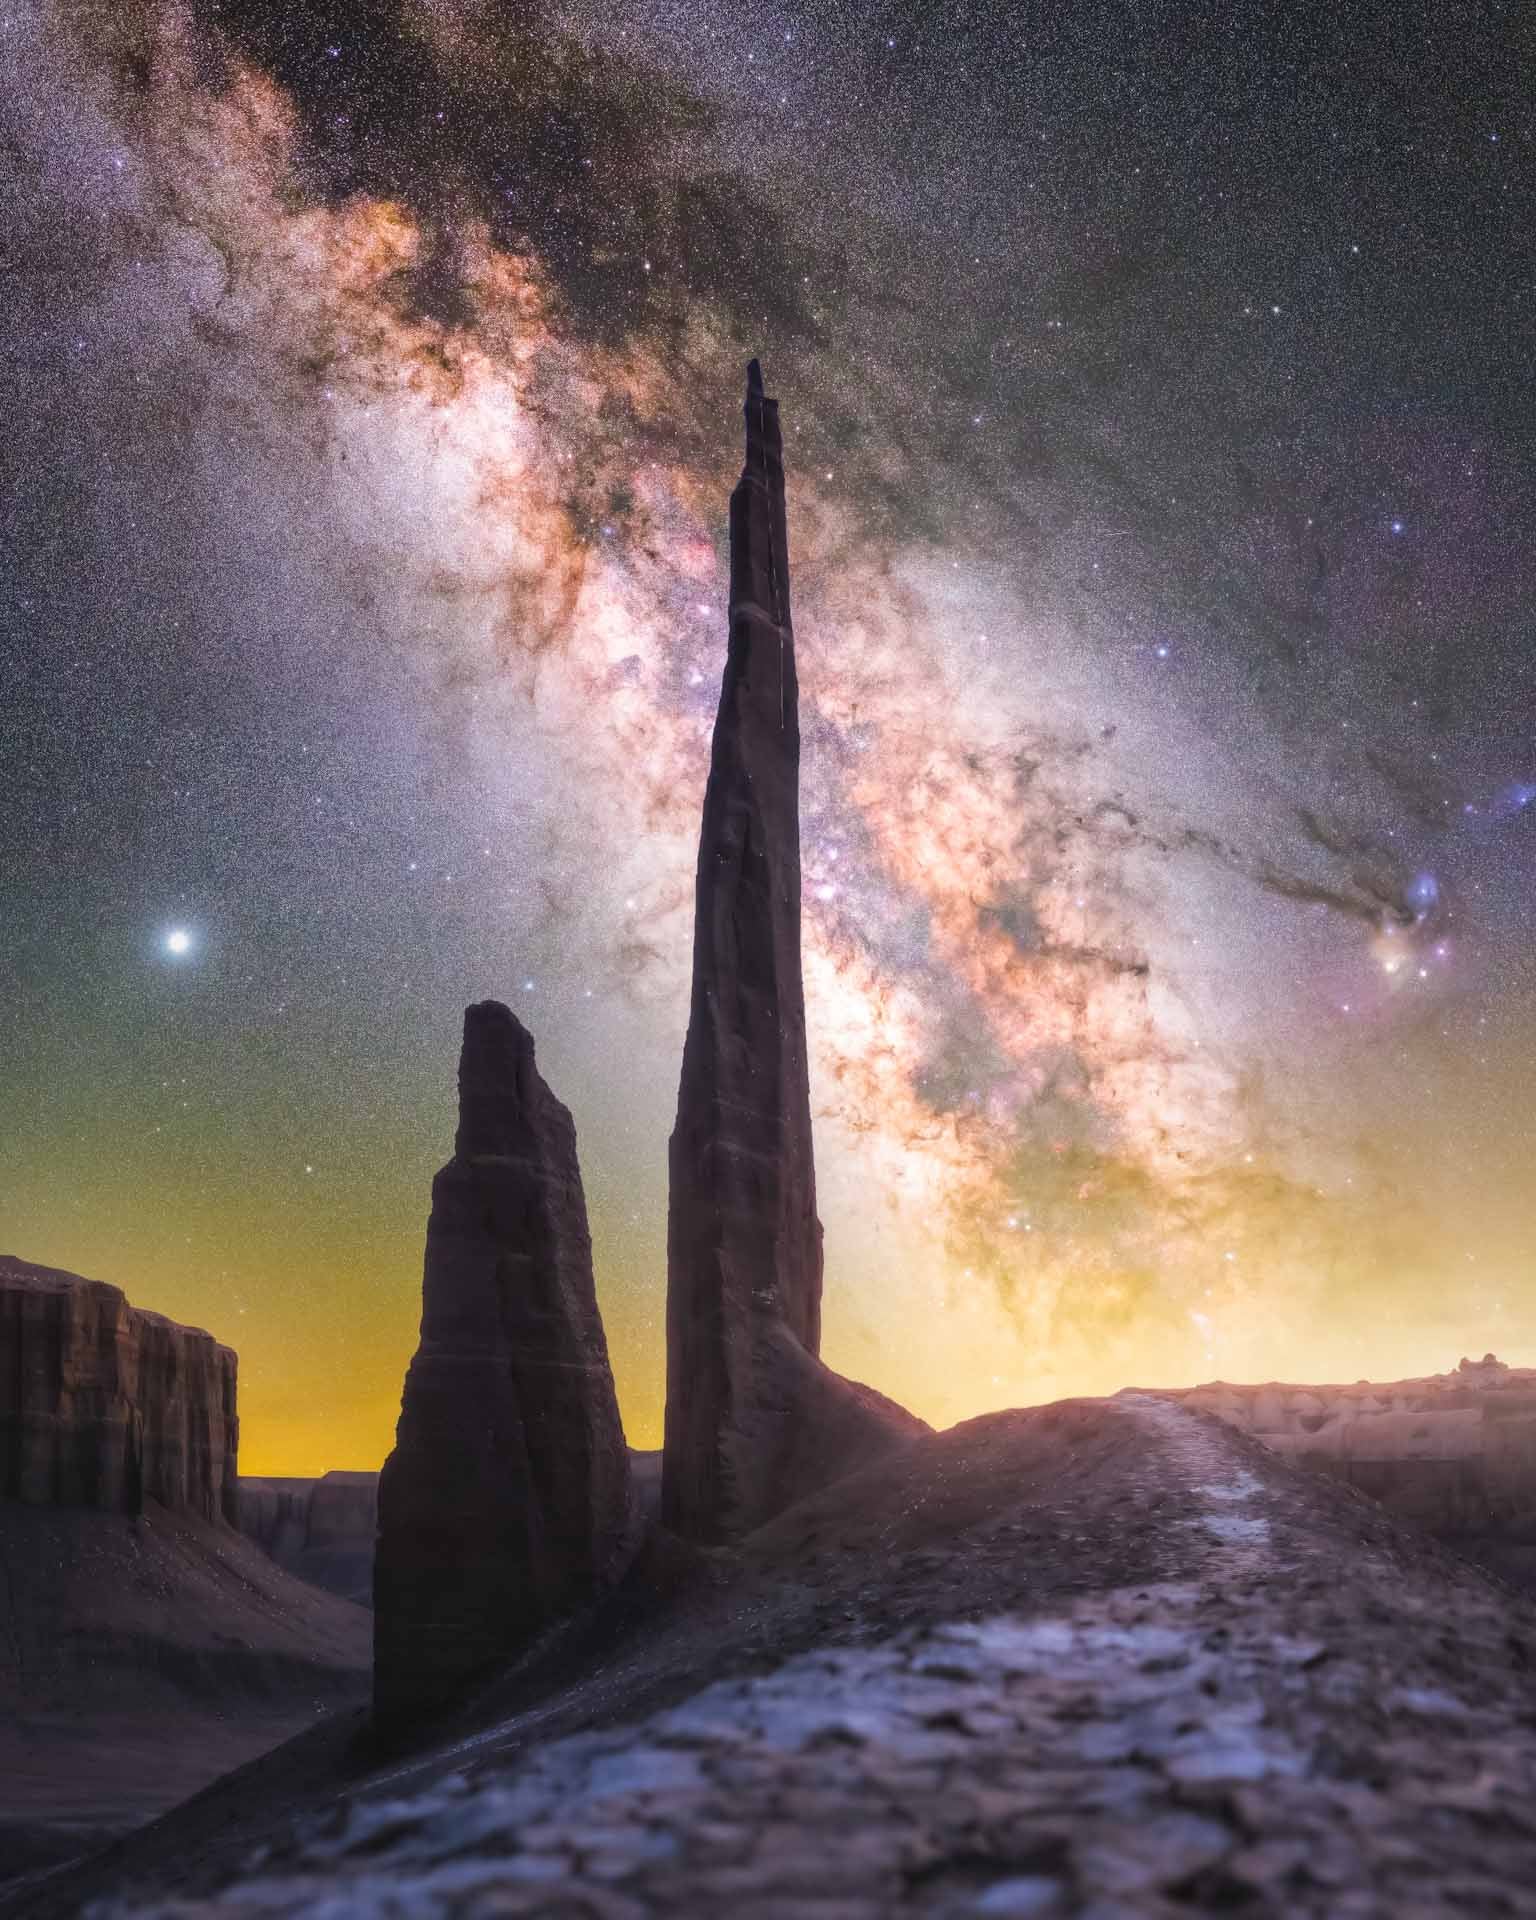 A rock pillar, the Milky Way behind it. (Photo: Spencer Welling)